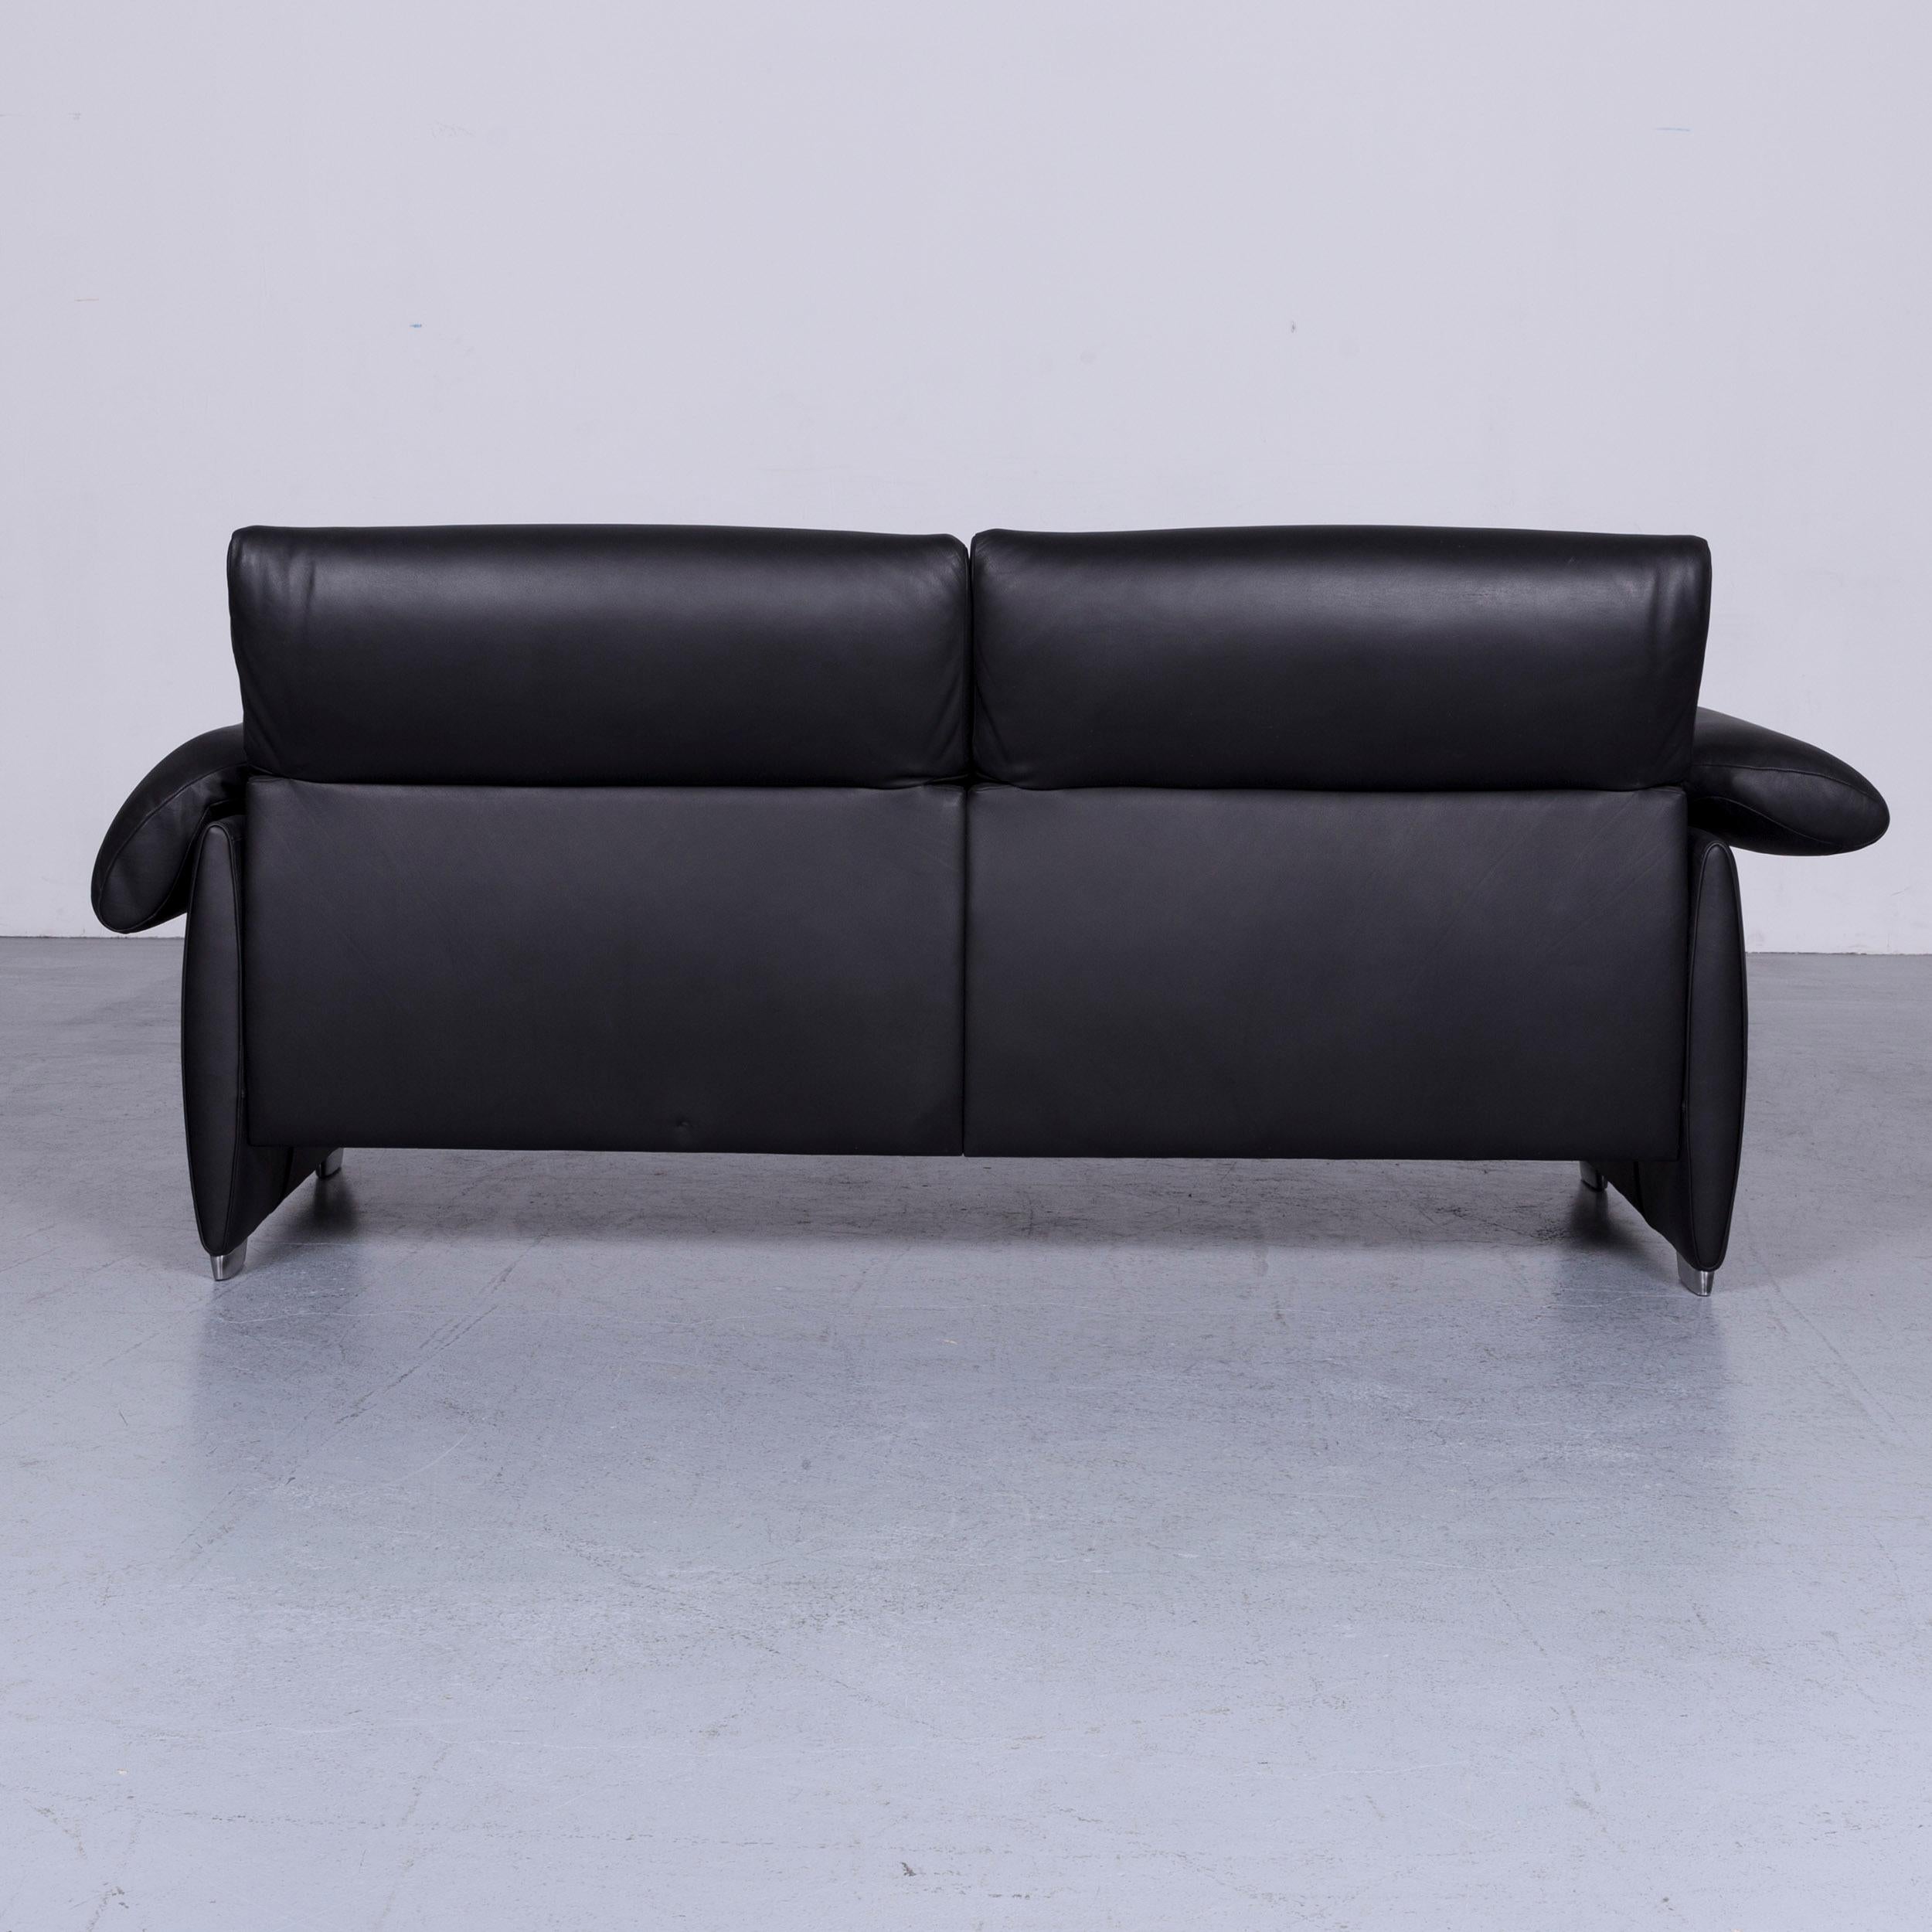 De Sede DS 10 Designer Sofa Black Leather Three-Seat Two-Seat Set Couch 5